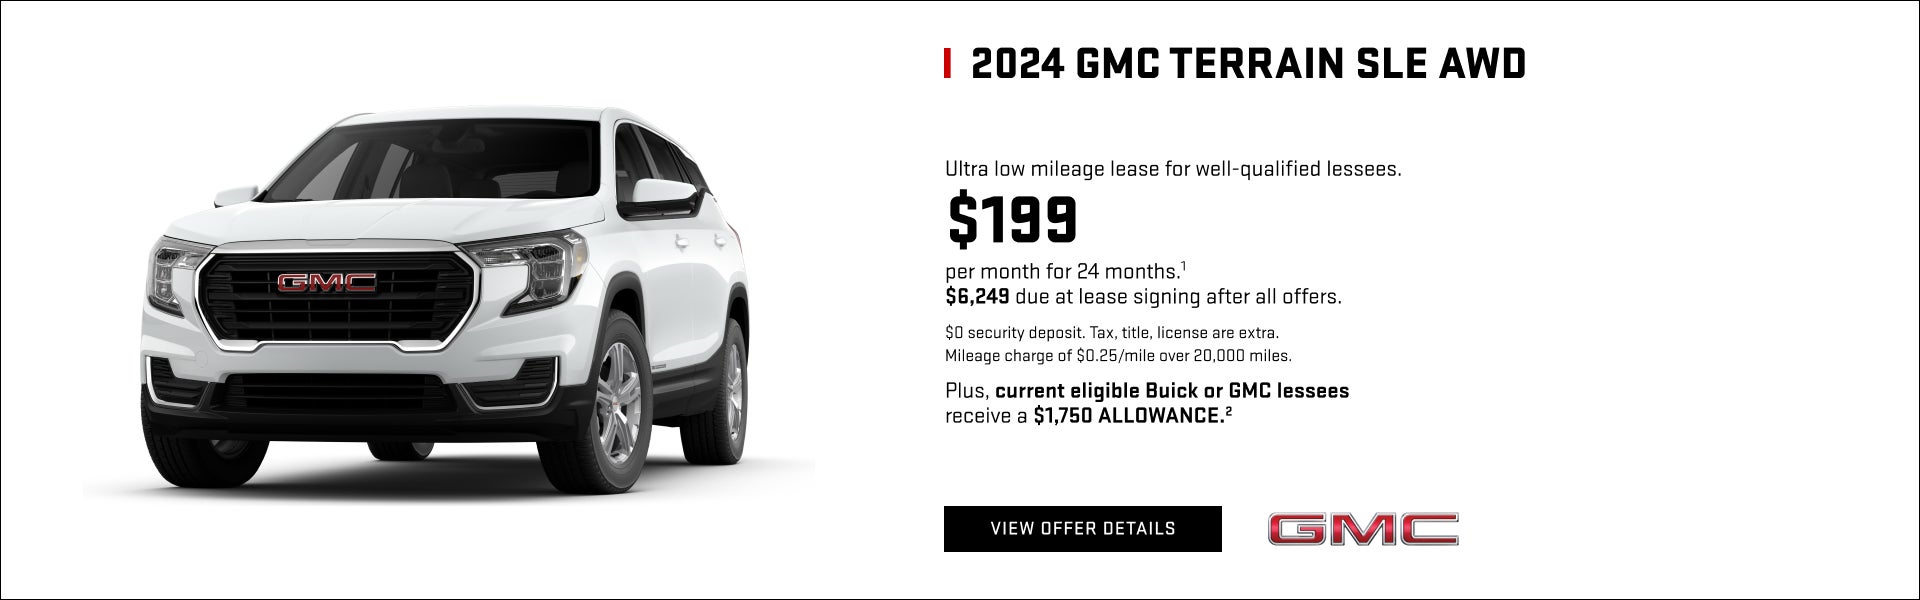 Ultra low mileage lease for well-qualified lessees.

$199 per month for 24 months.1 

$6,249 due ...